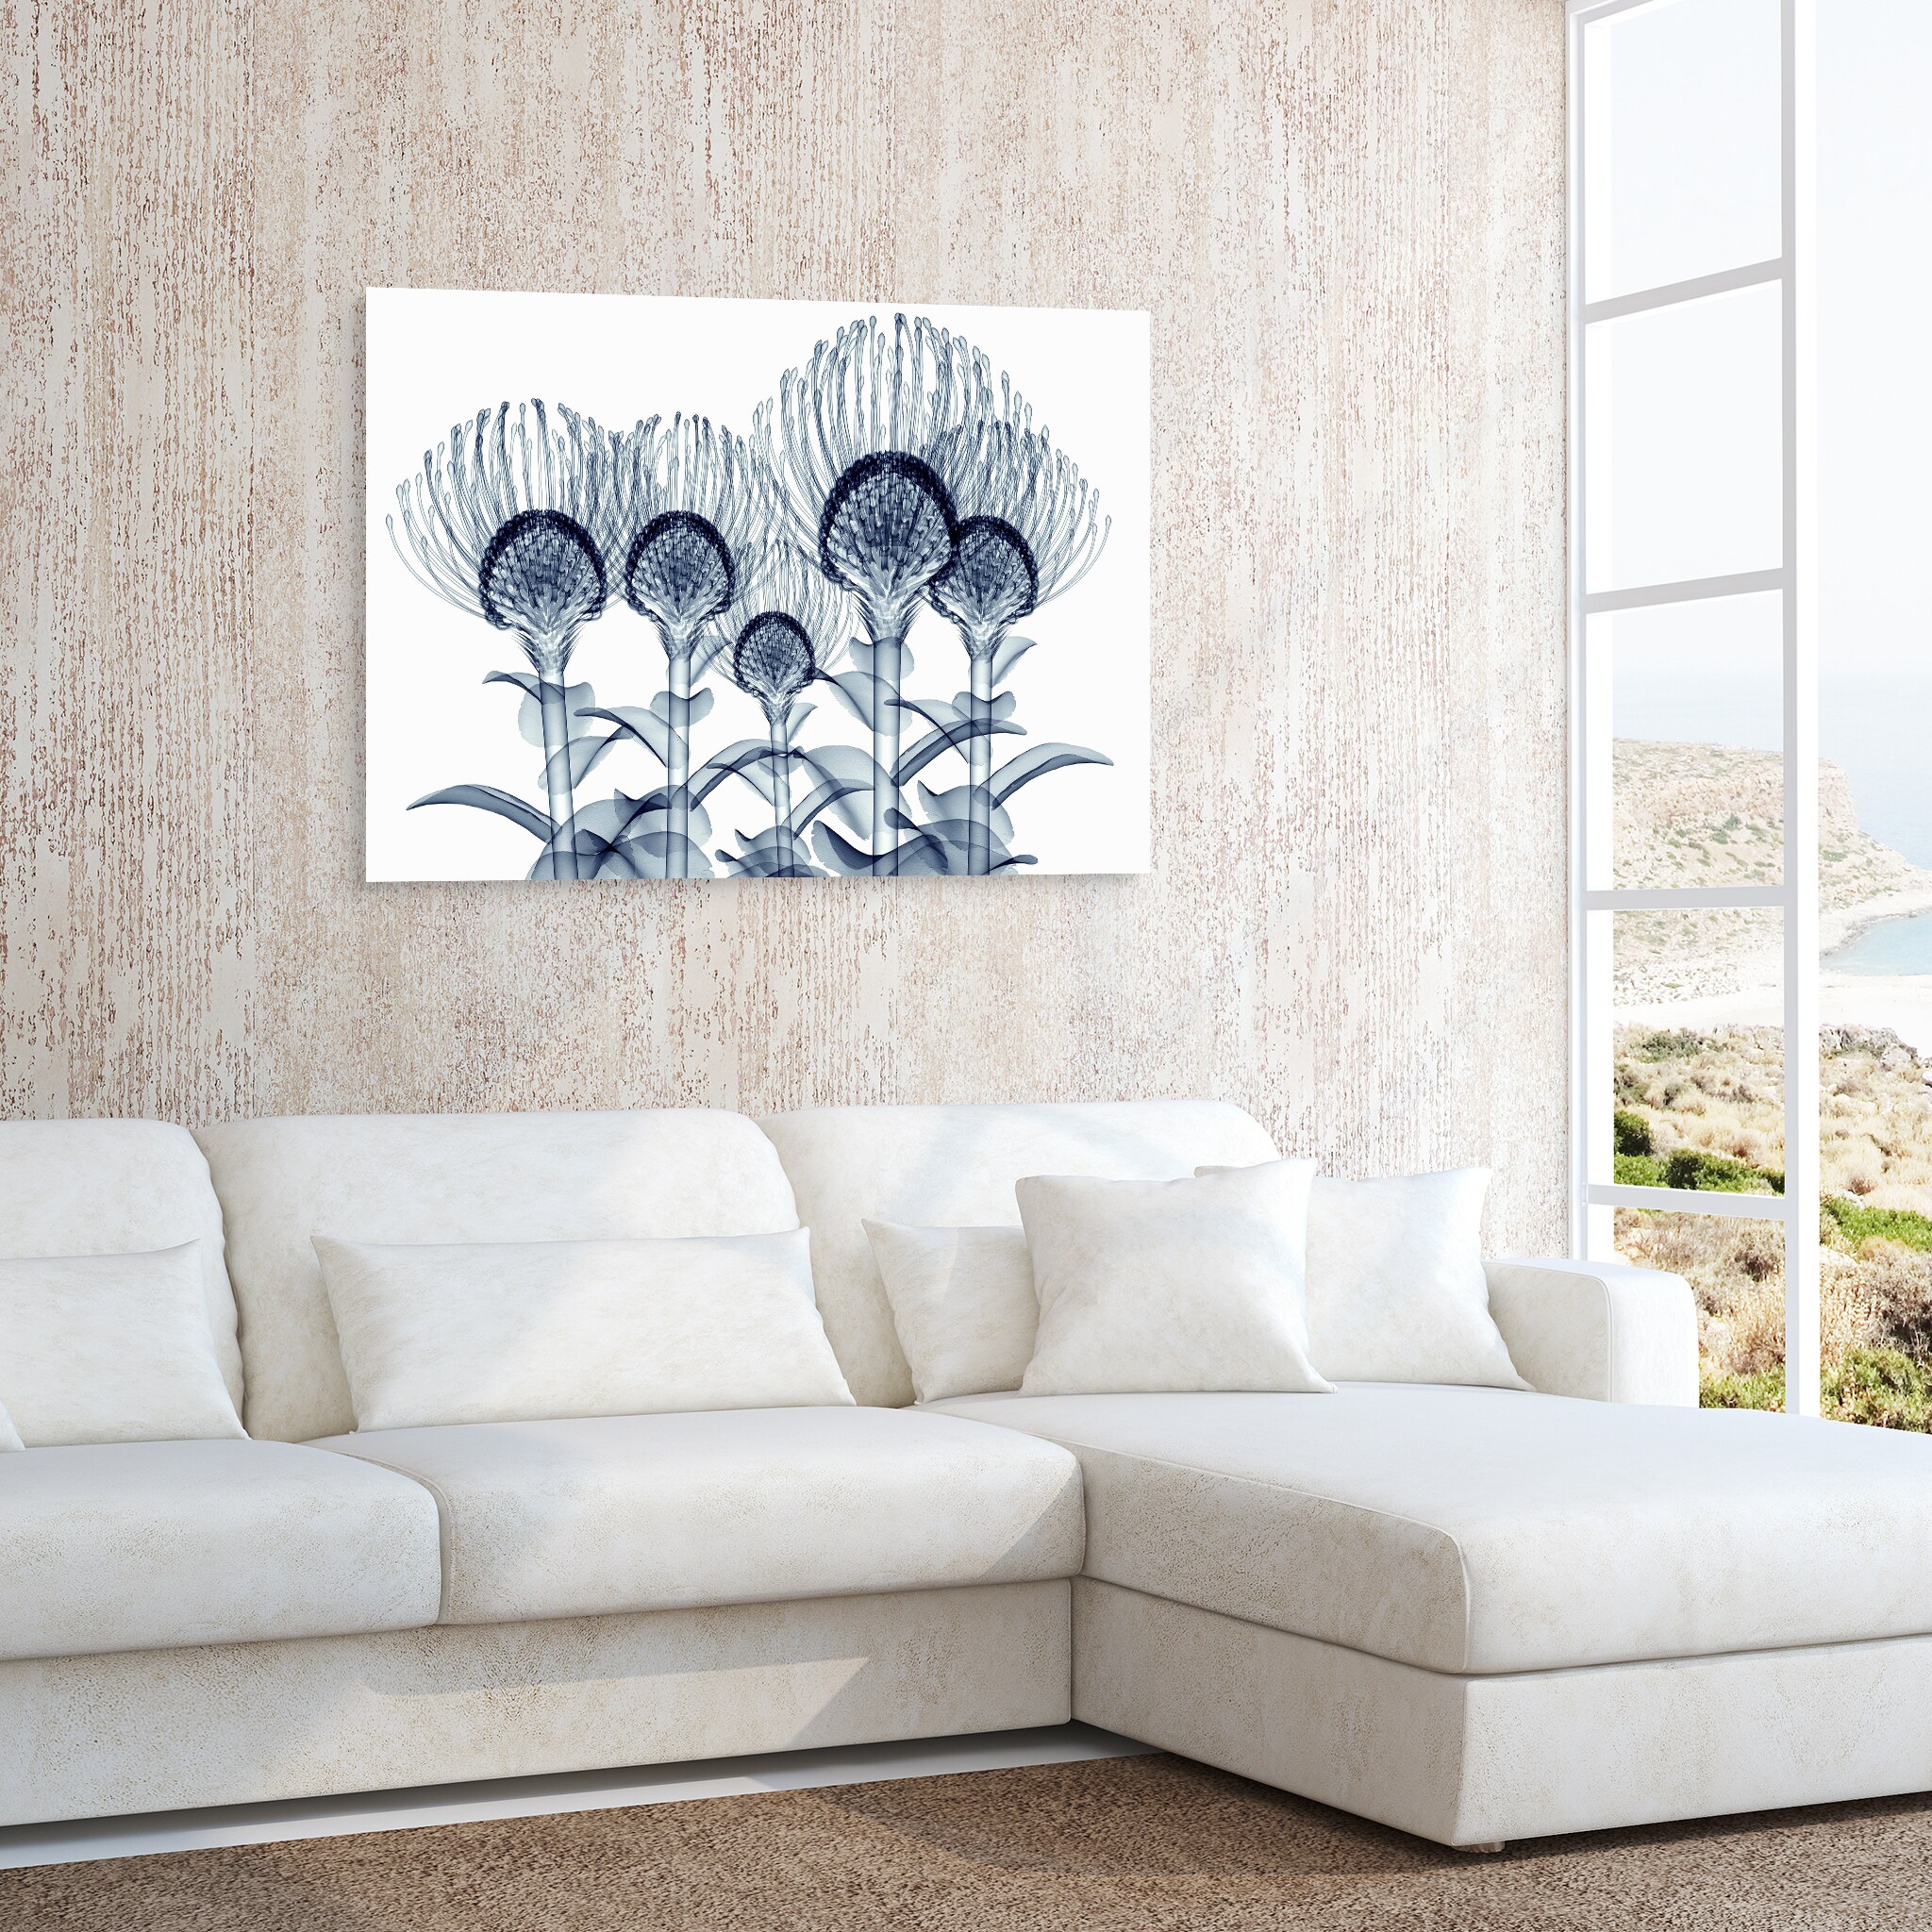 Empire Art Direct 32-in H x 48-in W Floral Glass Print at Lowes.com